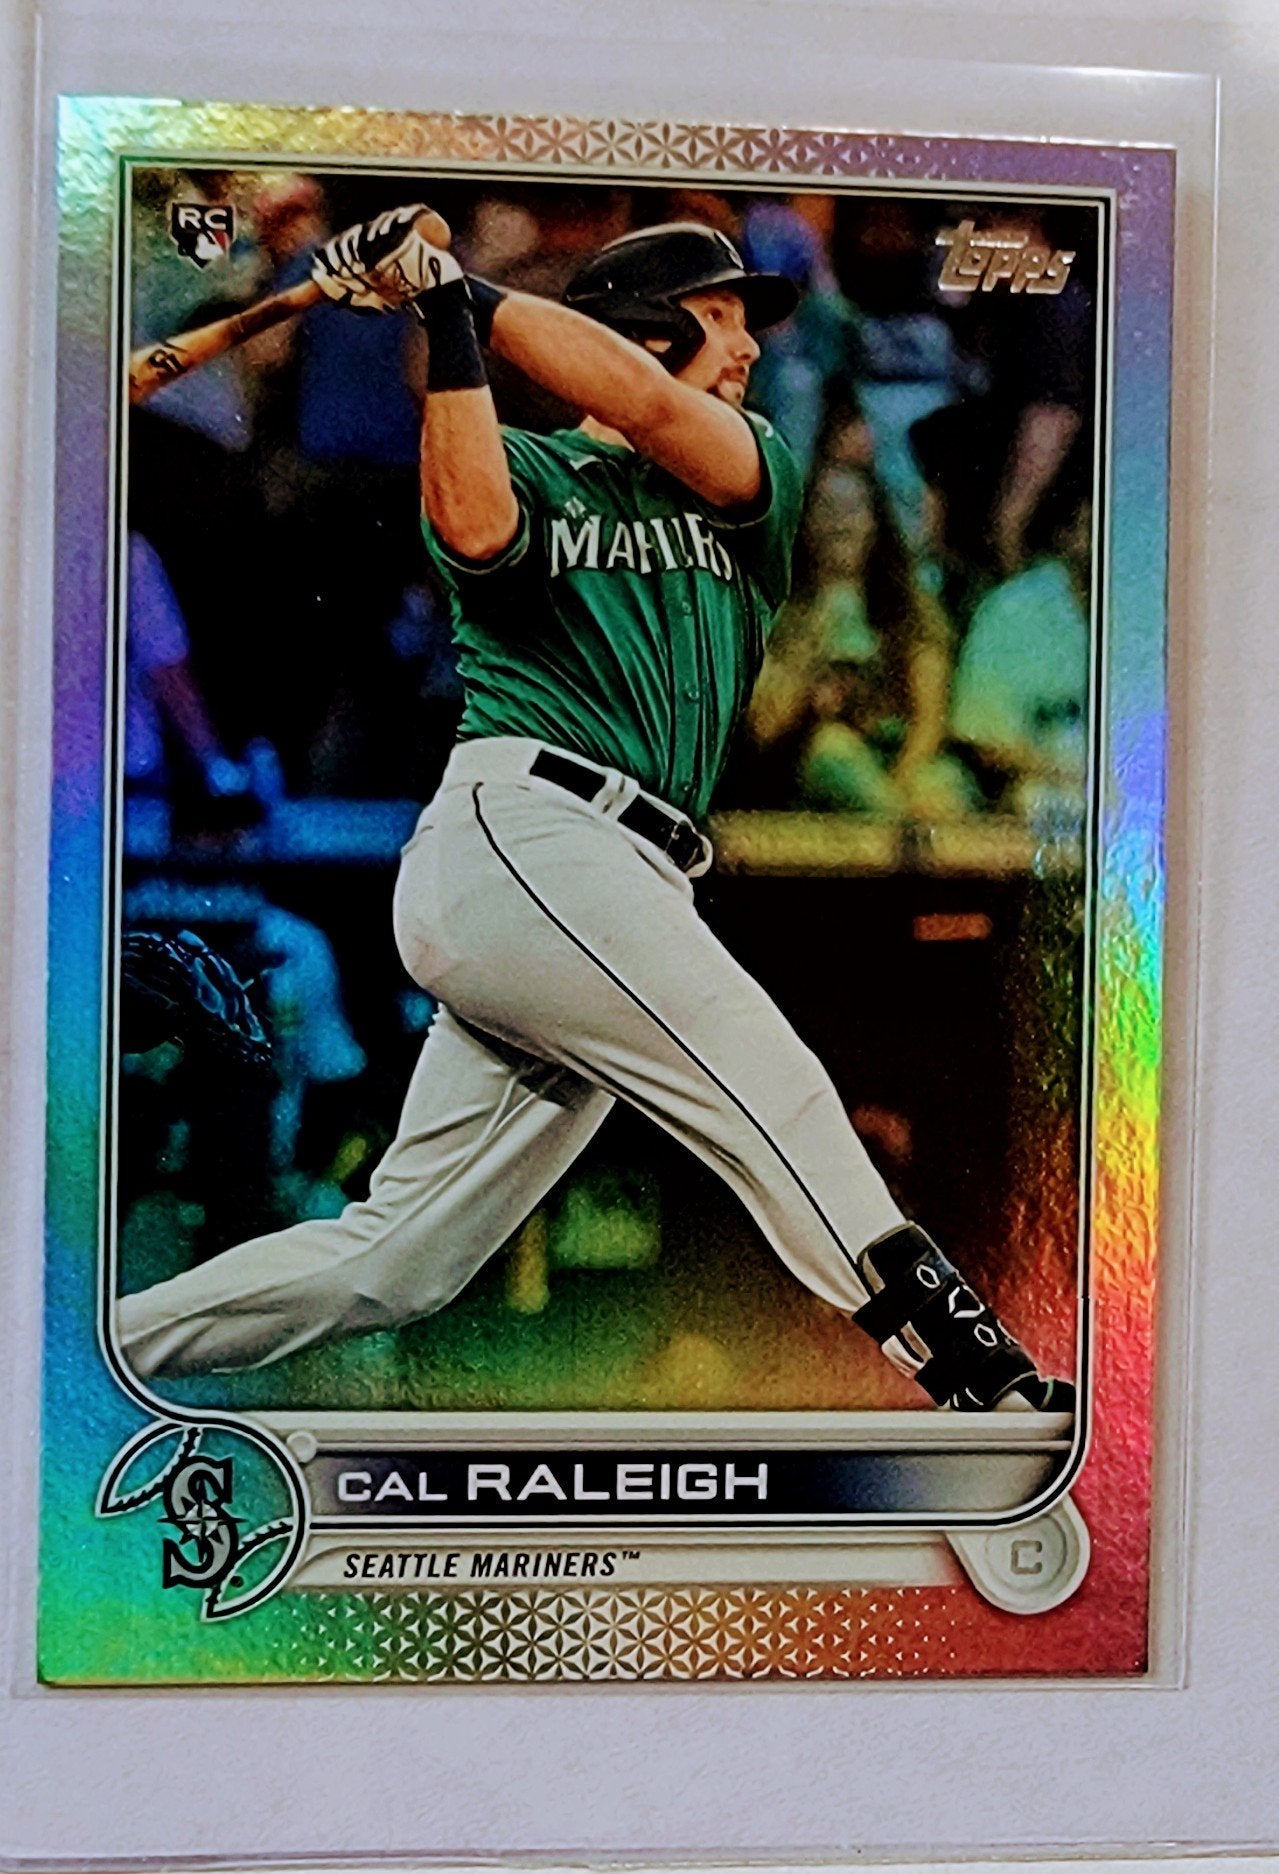 2022 Topps Cal Raleigh Foil Refractor Rookie Baseball Card AVM1 simple Xclusive Collectibles   